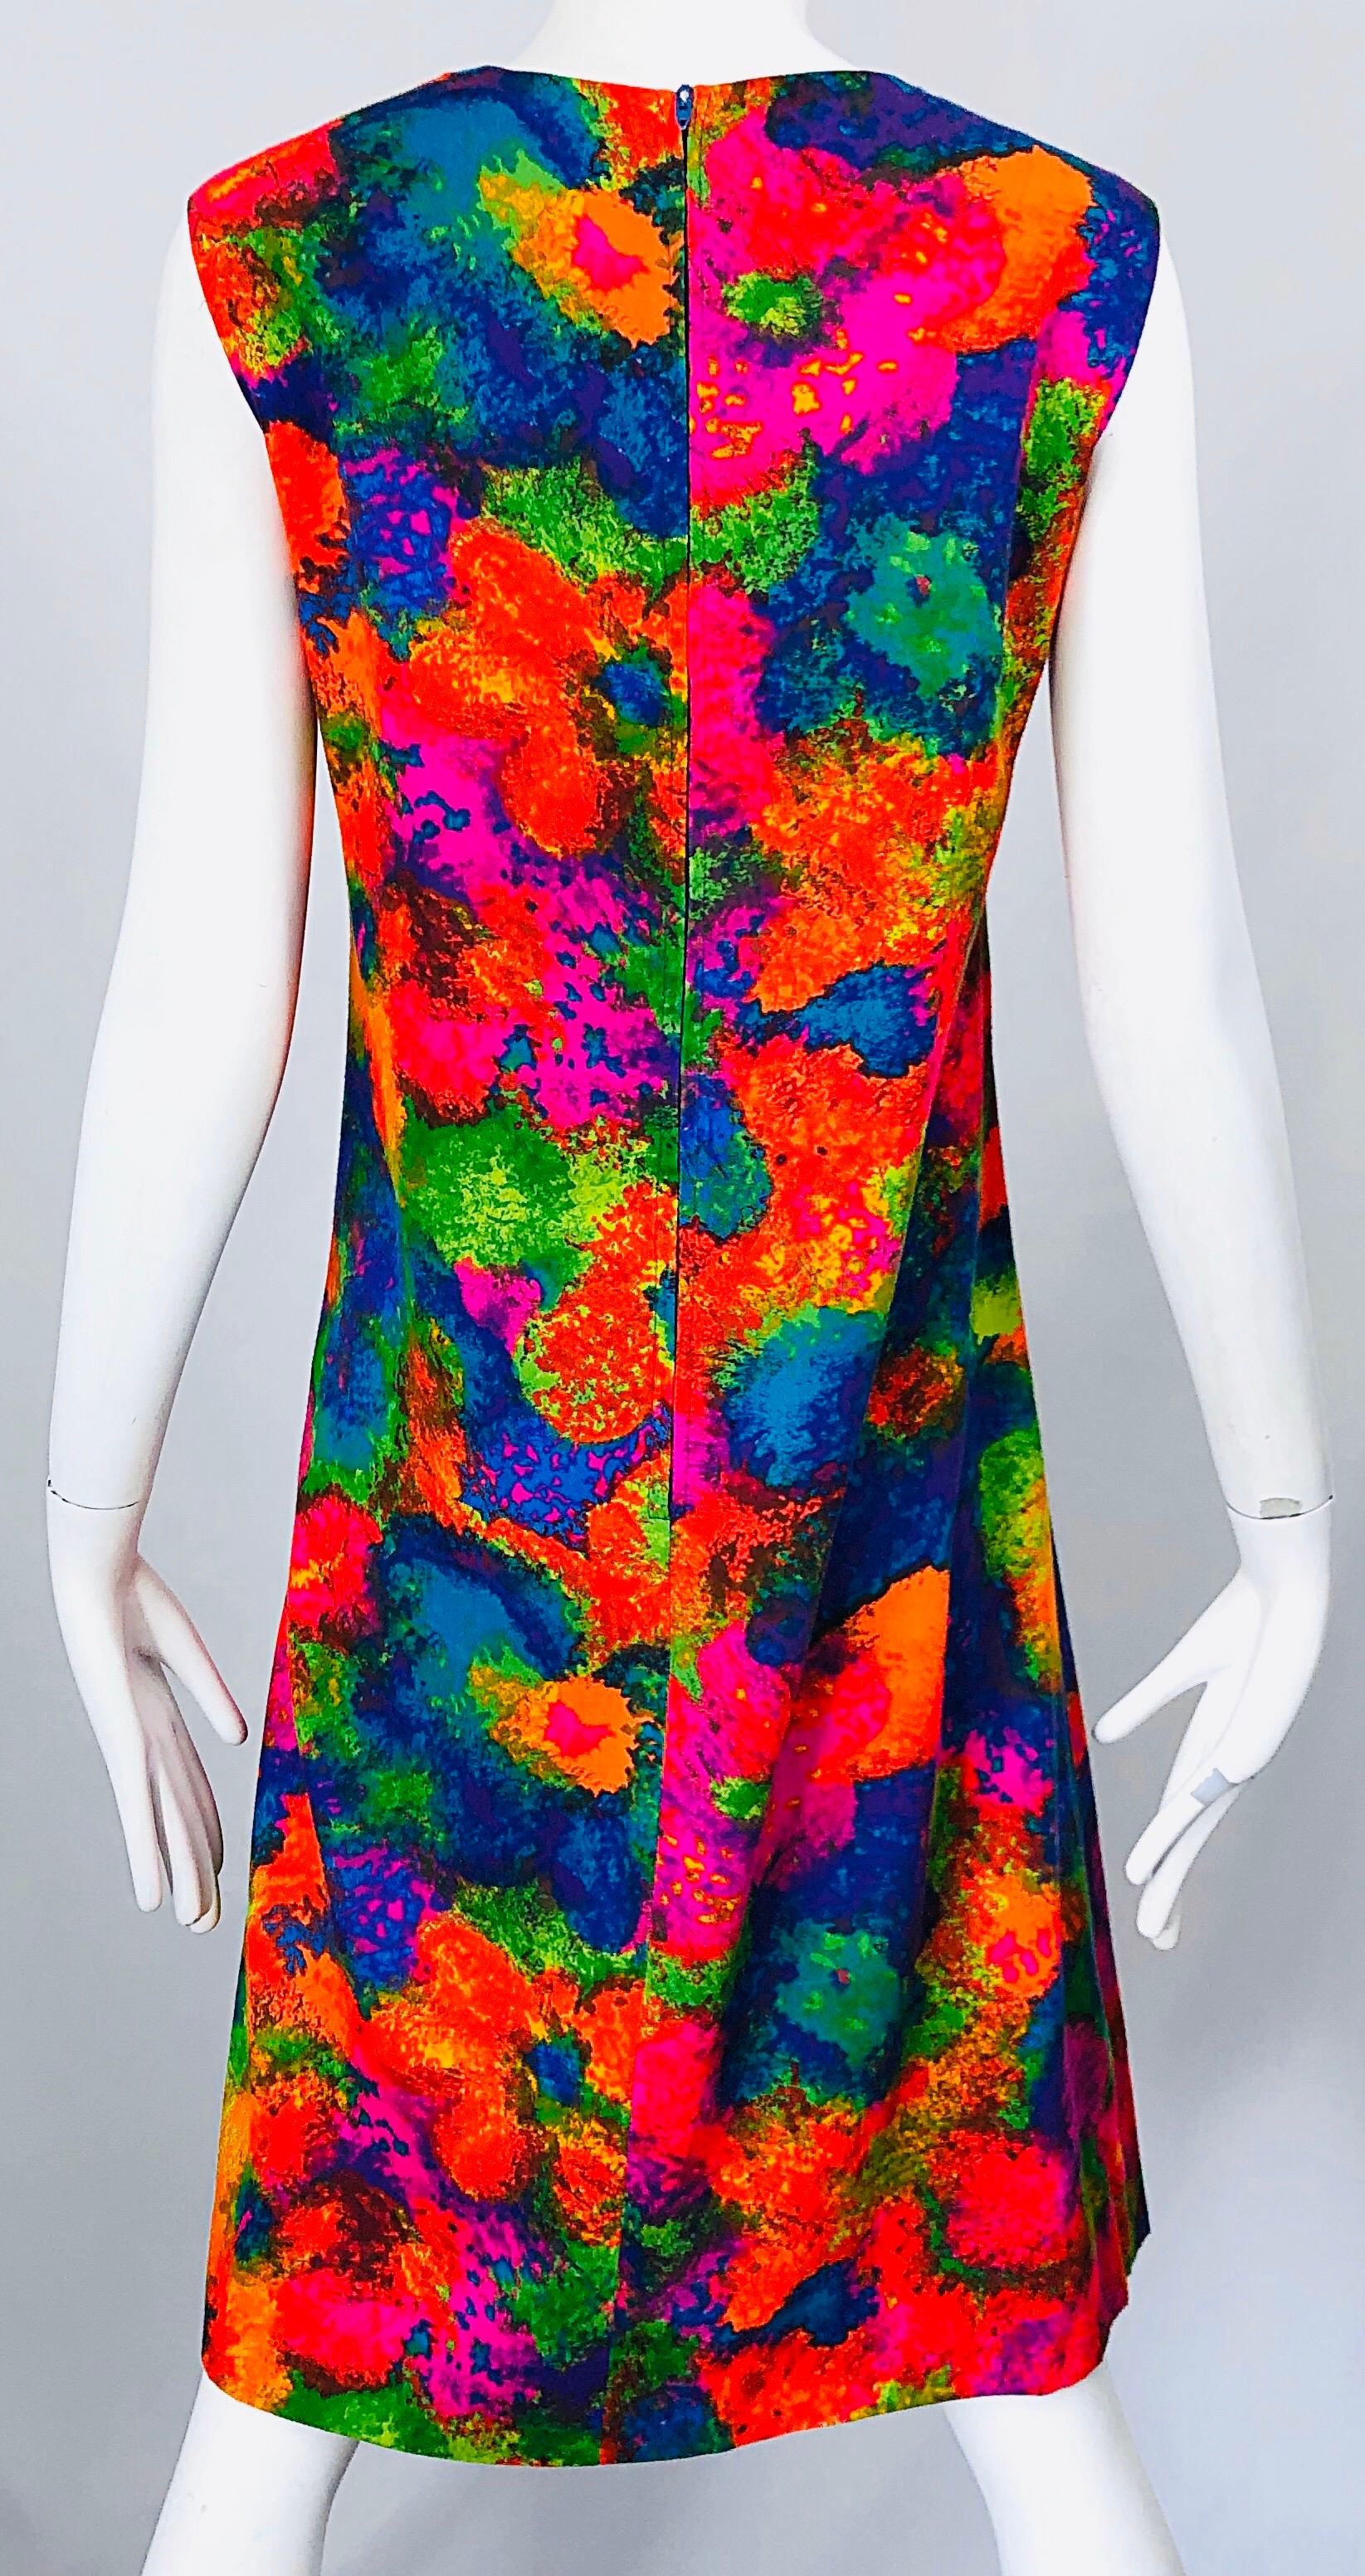 Chic 1960s Larger Size Neon Abstract Flower Print Vintage 60s Cotton Shift Dress For Sale 4